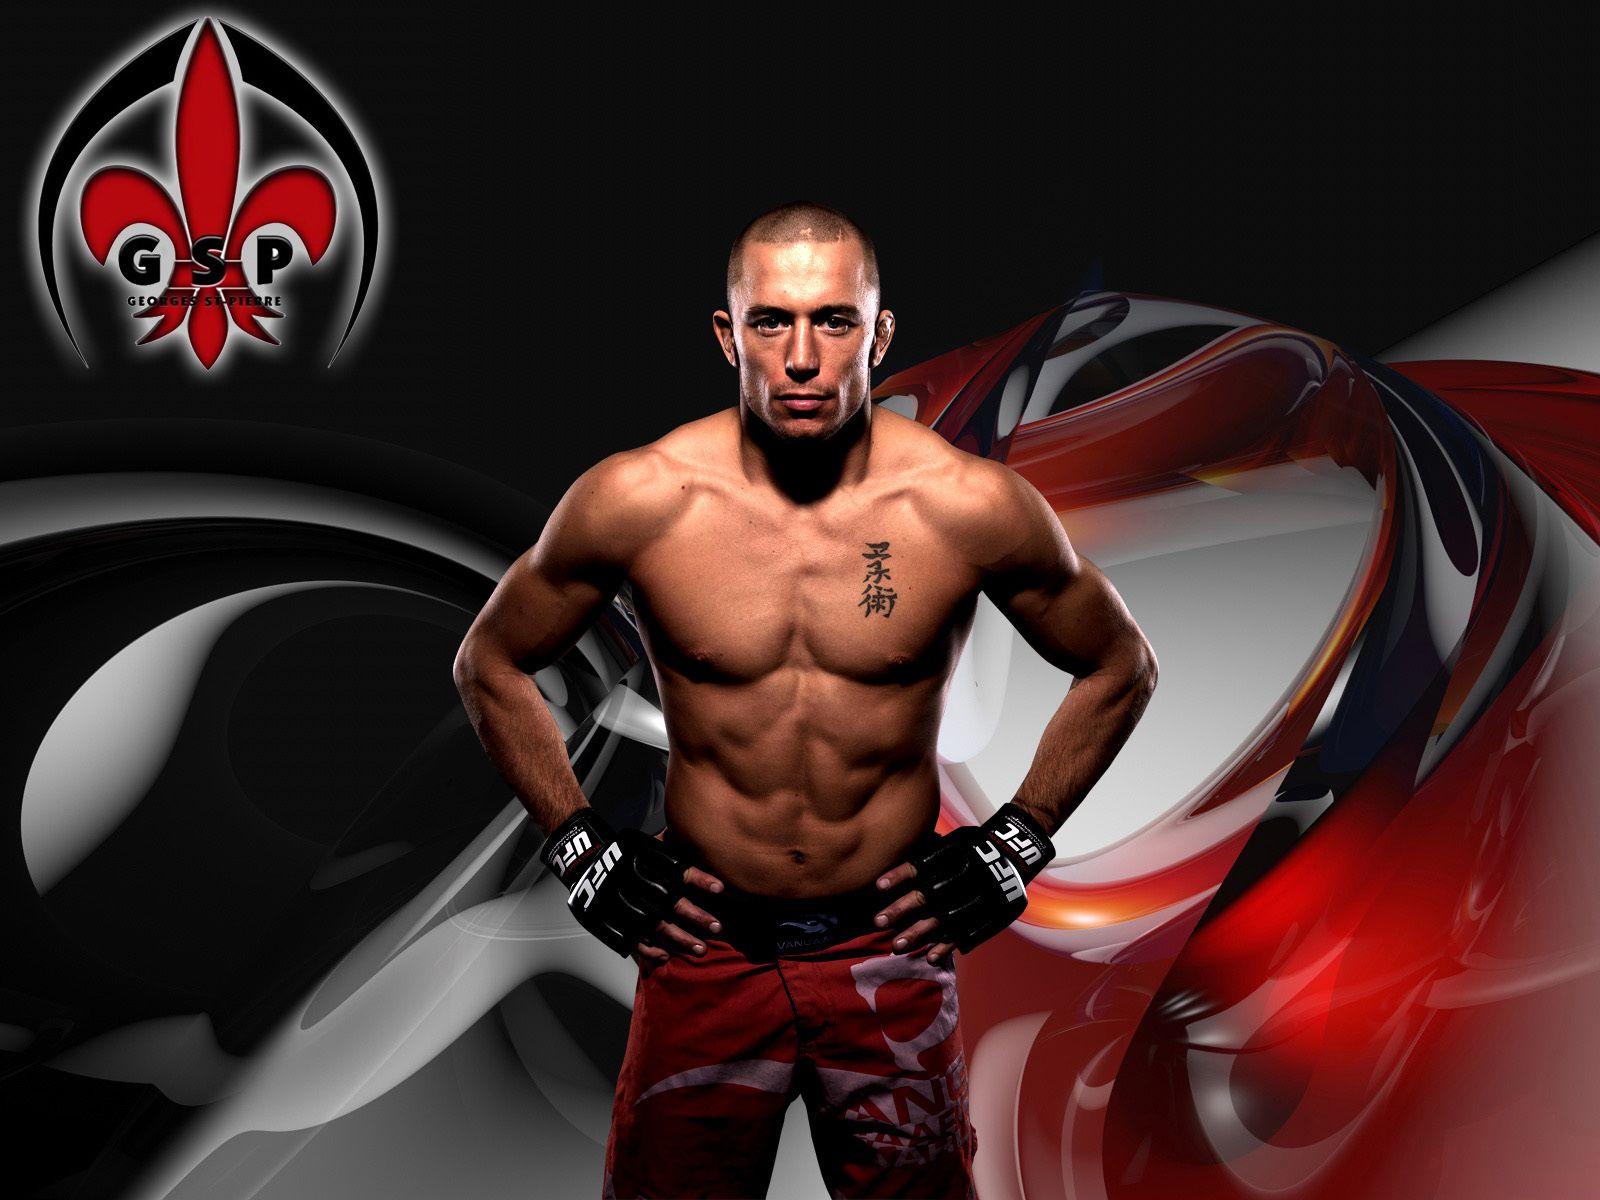 GSP: Georges Rush St Pierre (Wallpaper, 1600×1200). Martial